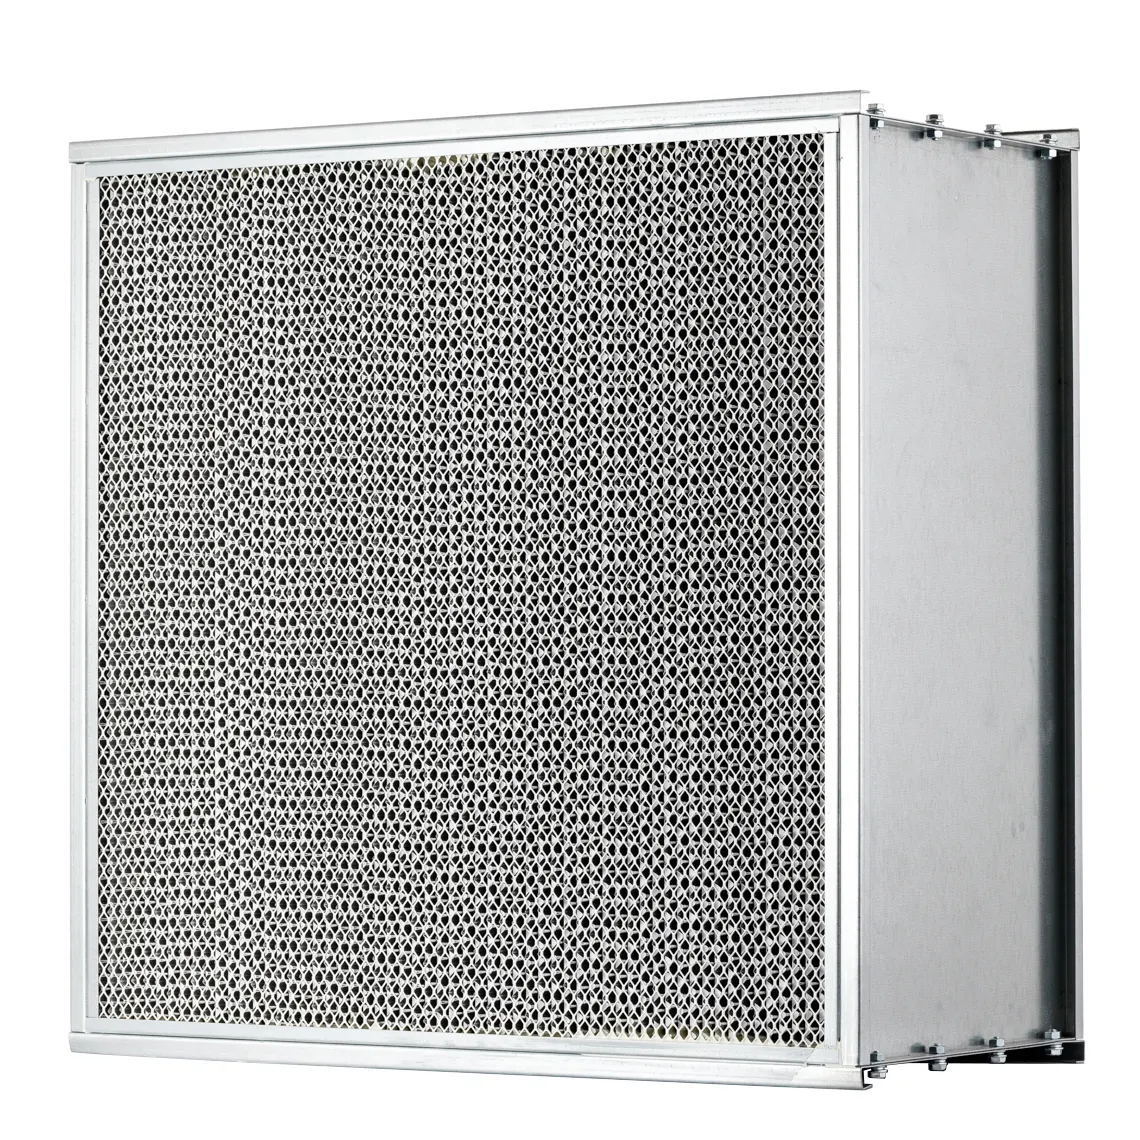 Absolute Box HEPA Air Filter with Separator HEPA Filter for Pharma Electronic Food and Beverage Solar Industry H13 H14 99.97%